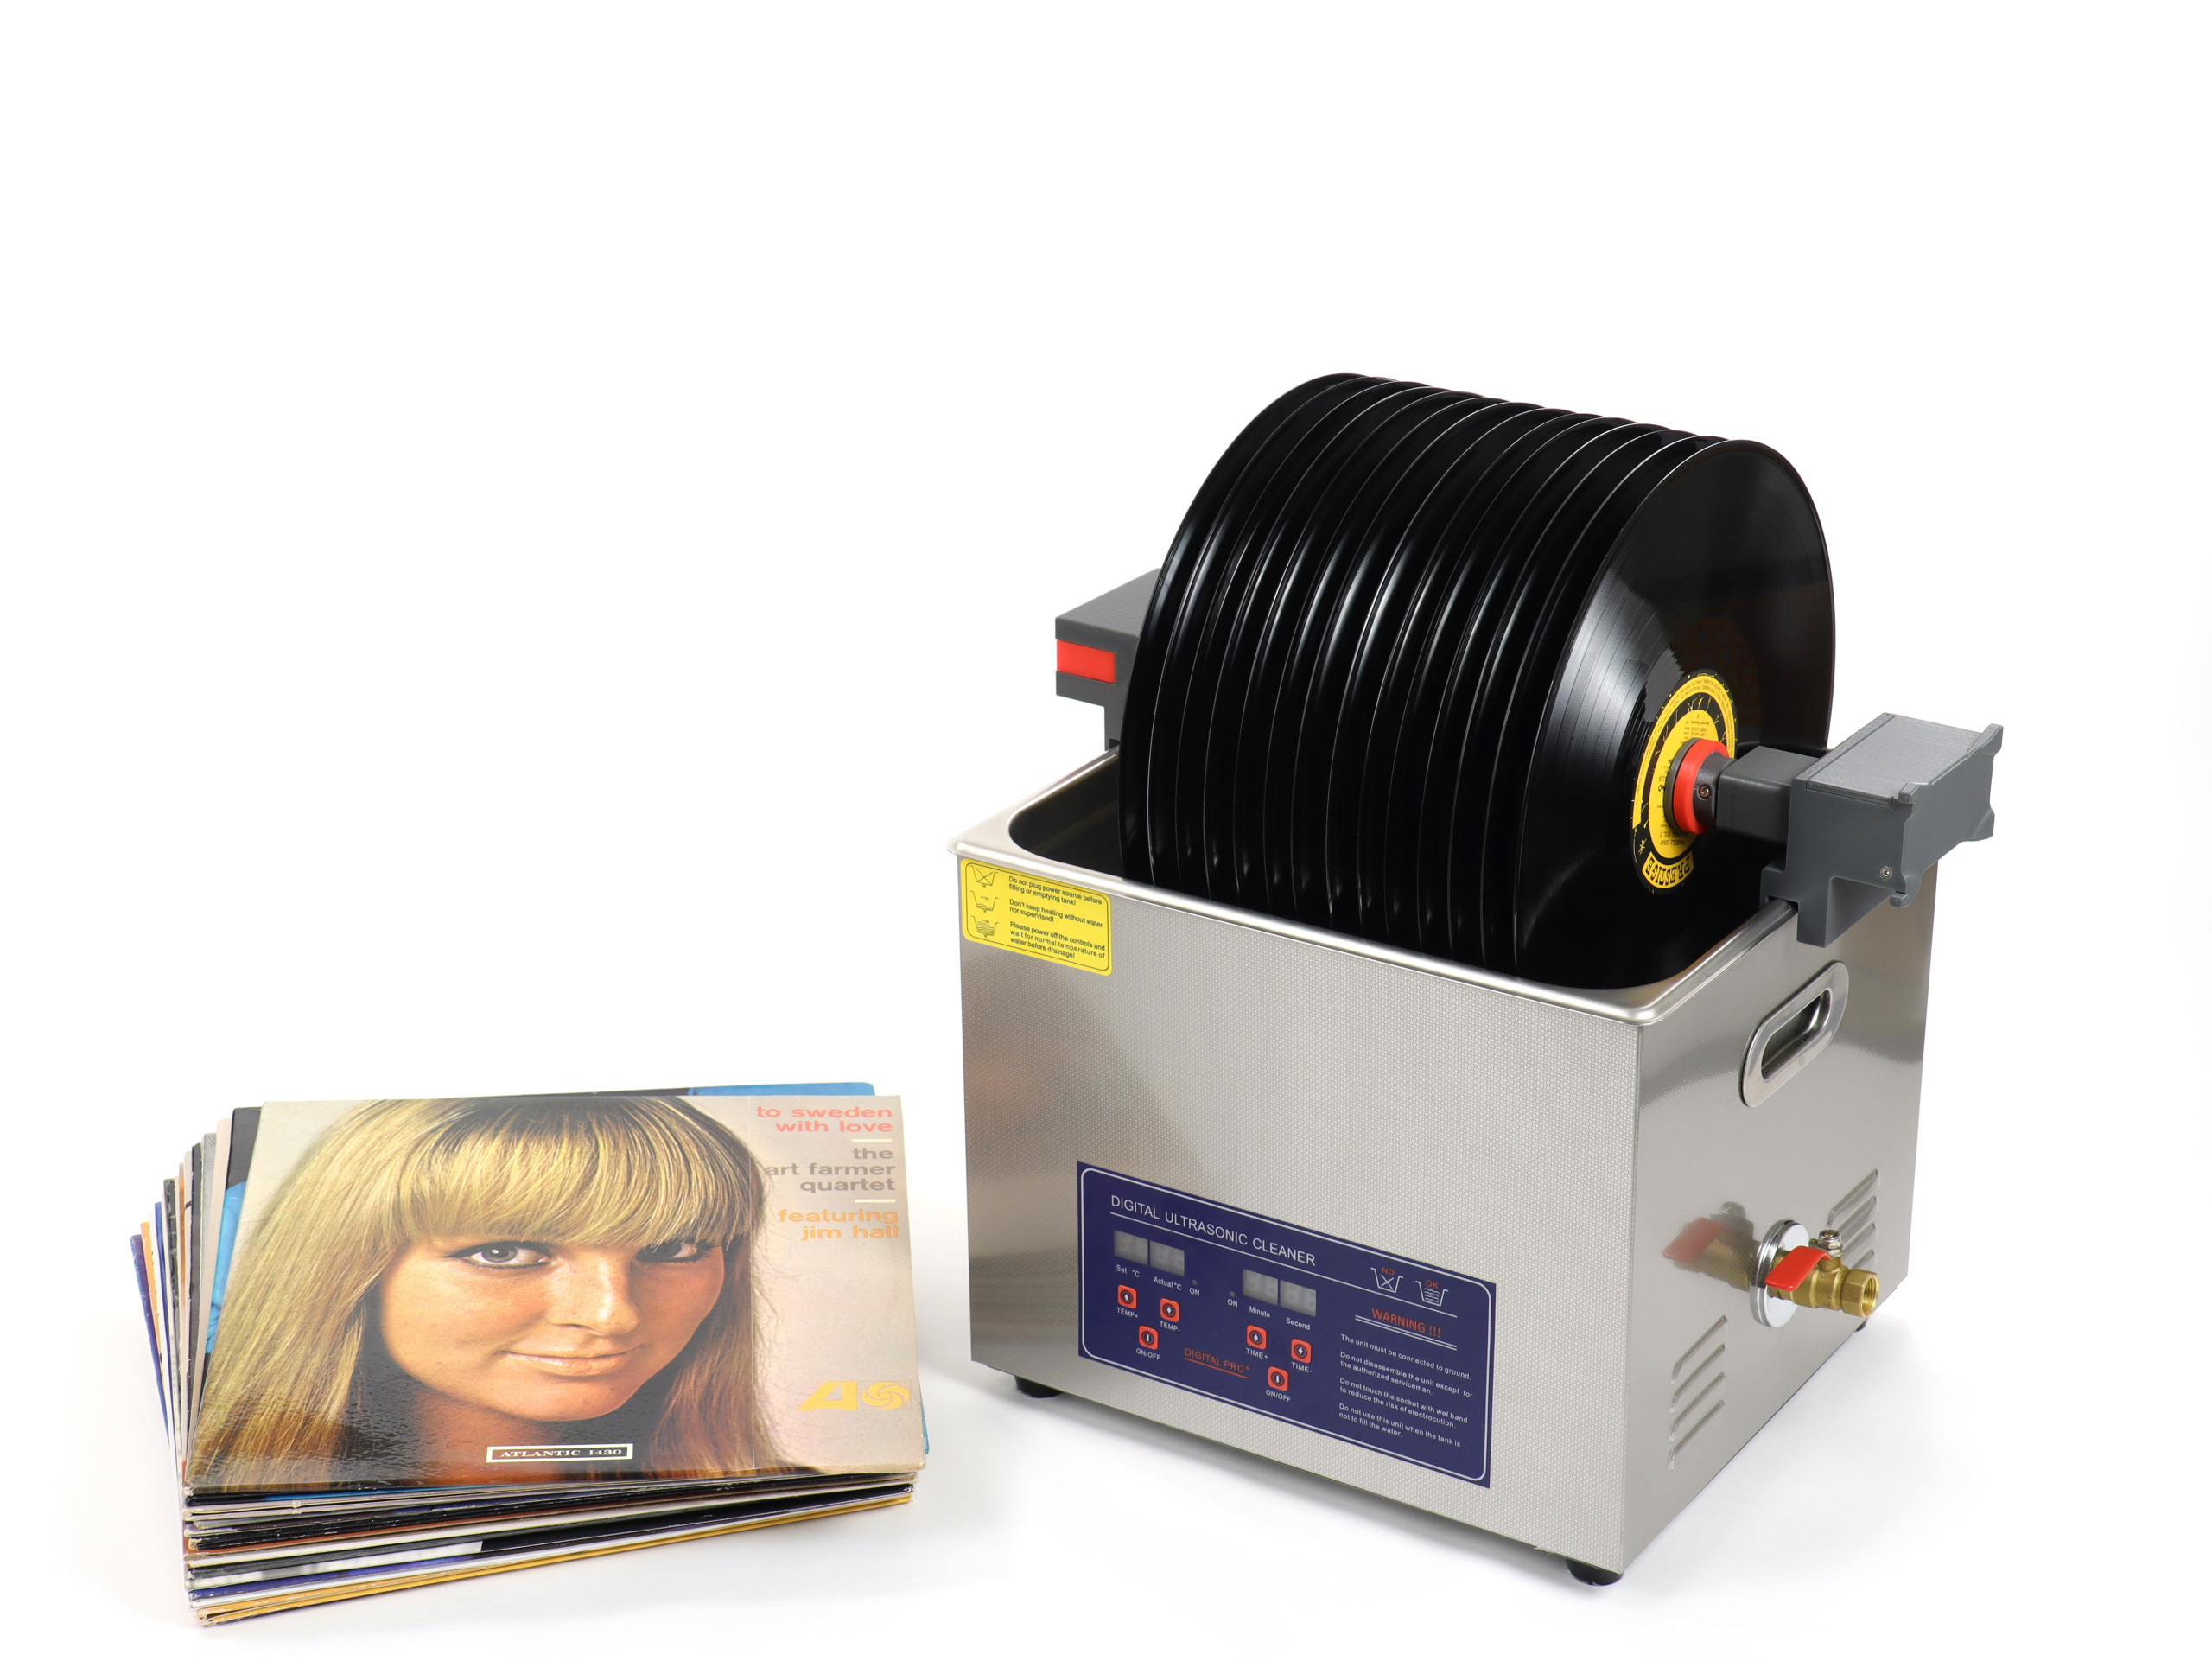 Ultrasonic Vinyl Record Cleaning - CleanerVinyl Pro (14 Records